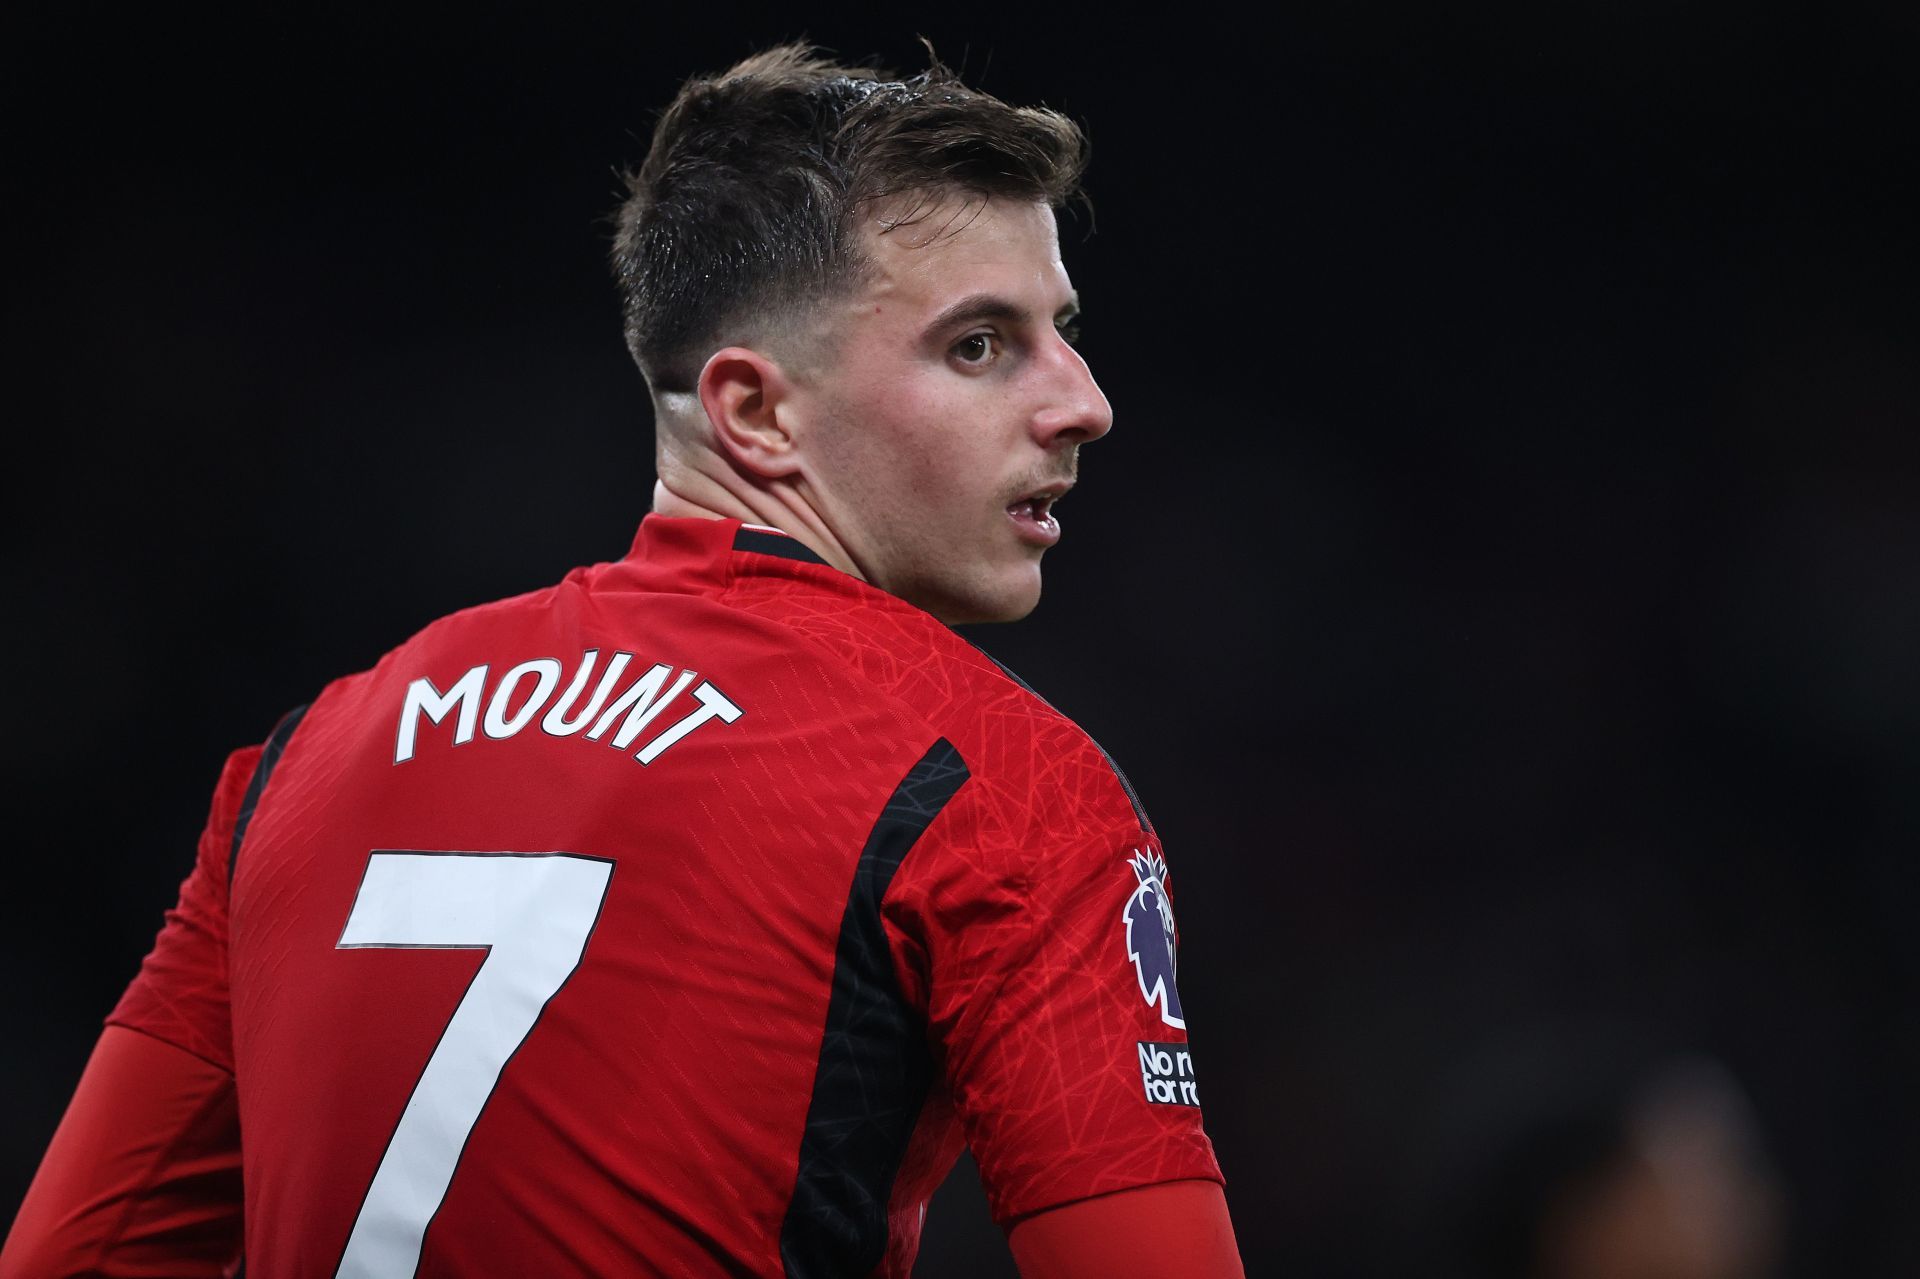 Mason Mount joined Manchester United this summer.